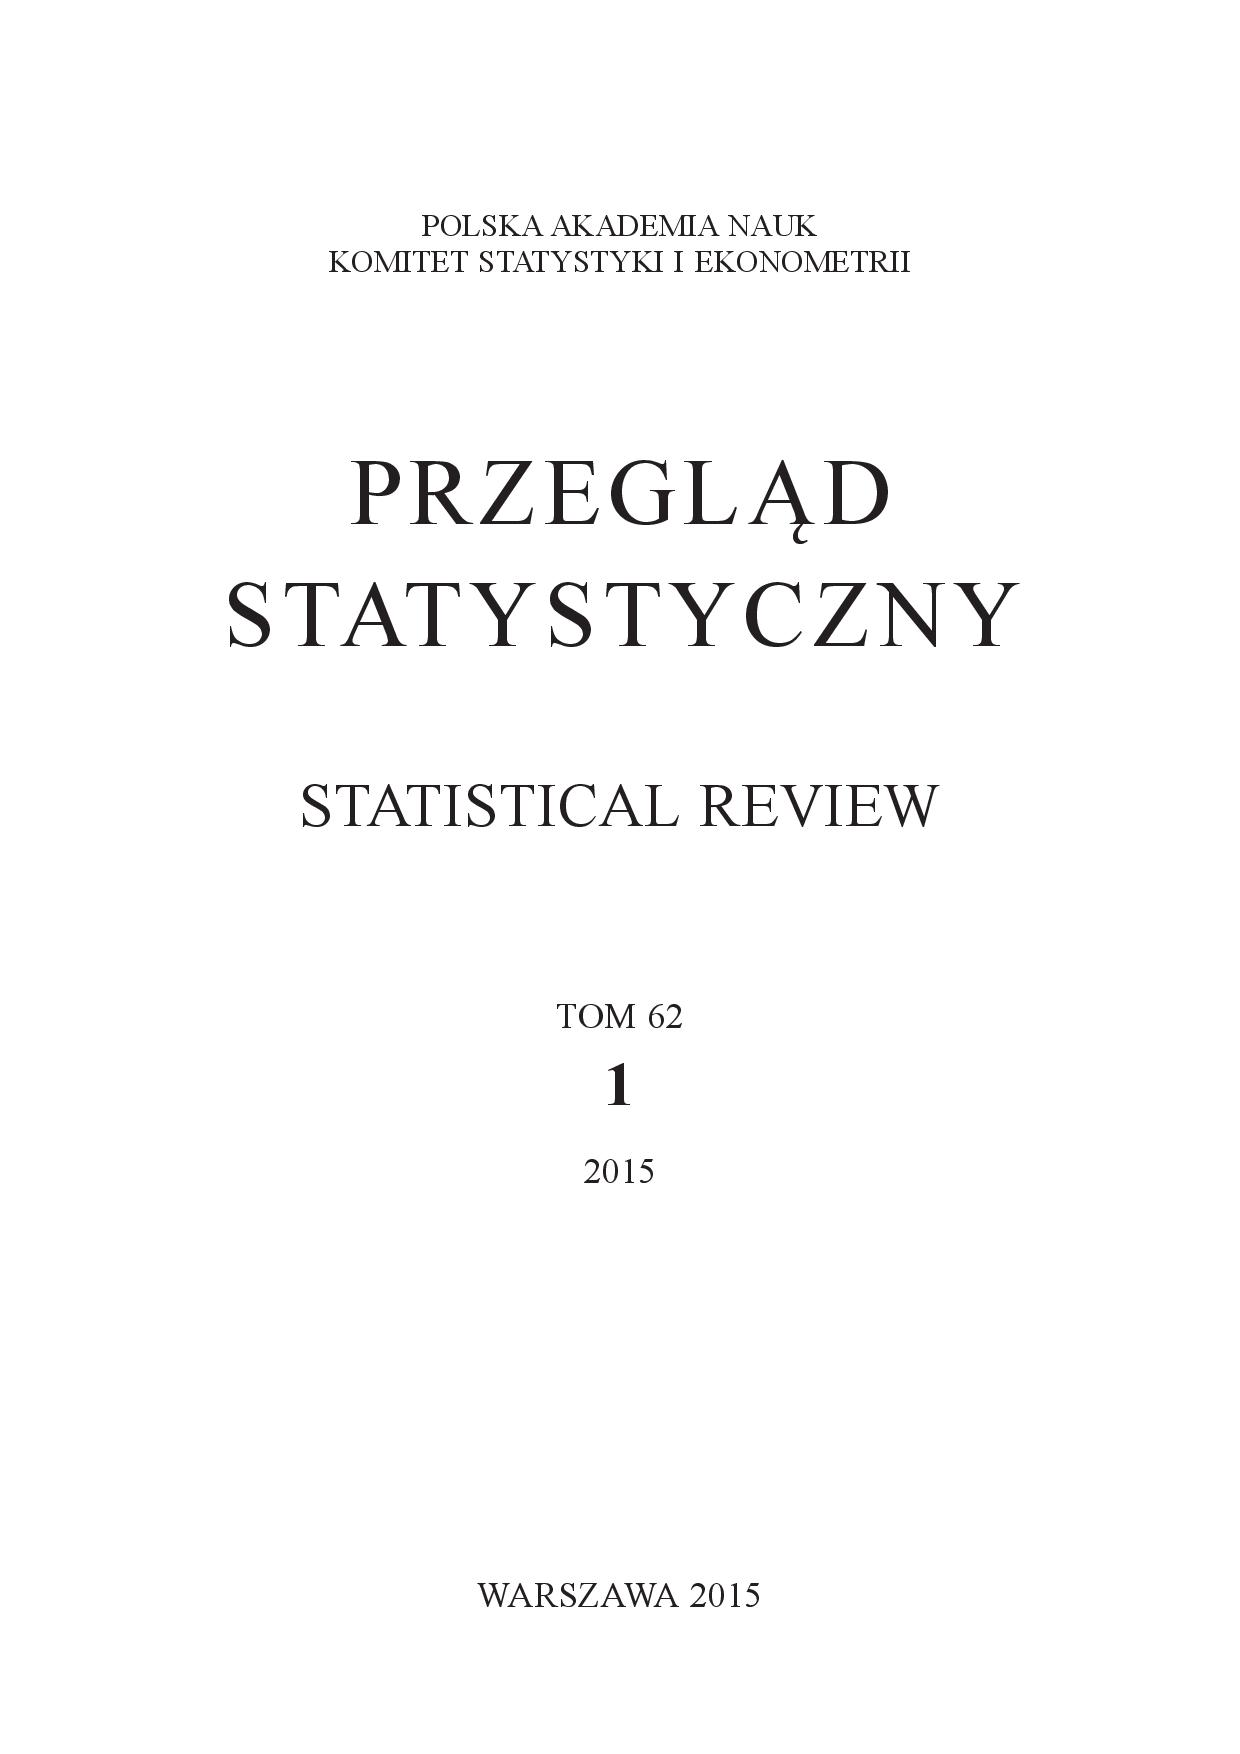 The Research of the Foreign Trade Competitiveness in Dynamic Approach on the Example of Poland Cover Image